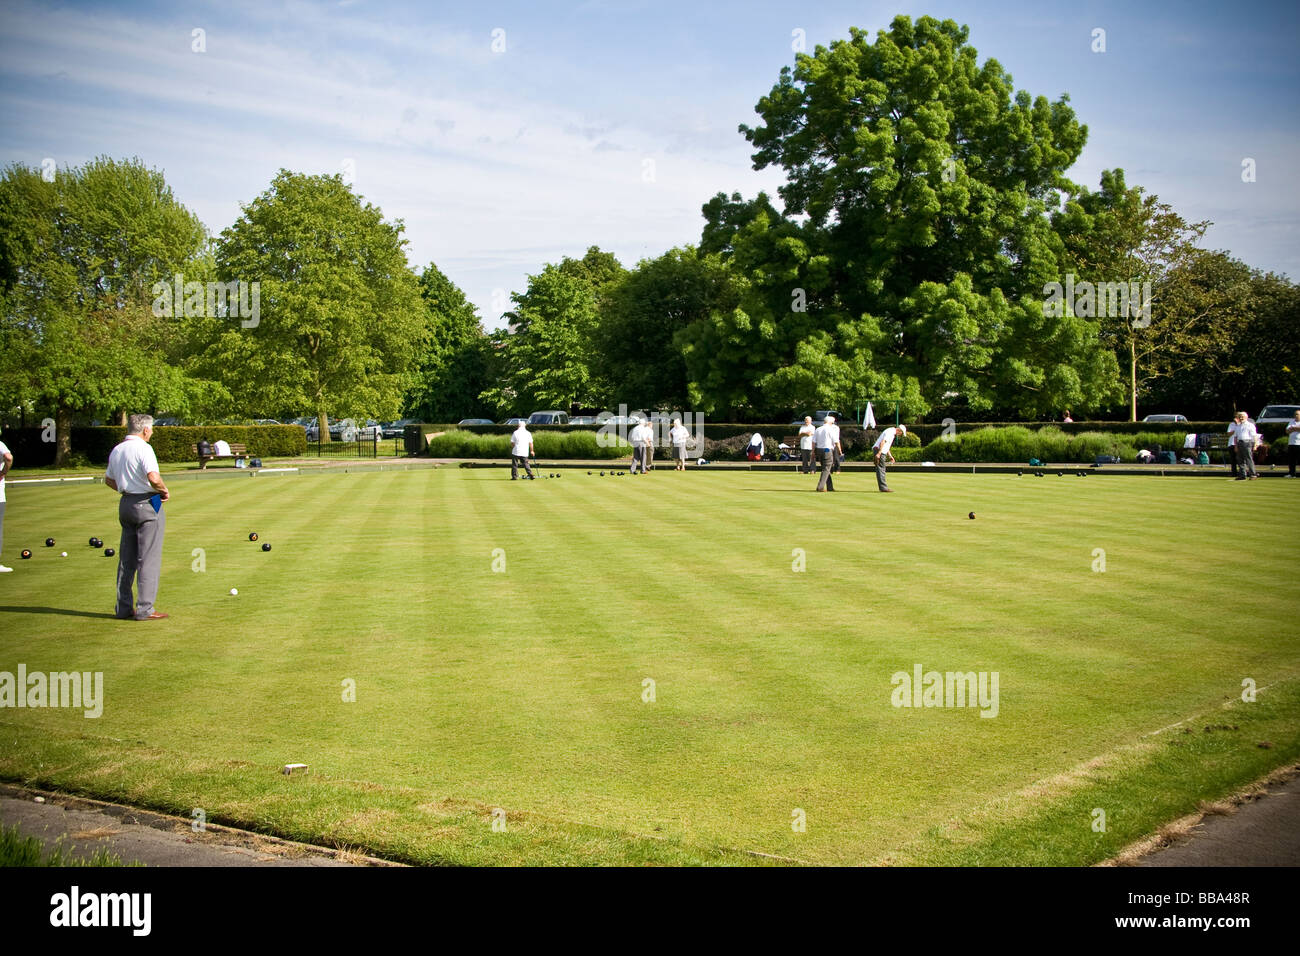 Seniors bowling on a bowling green in summer Stock Photo